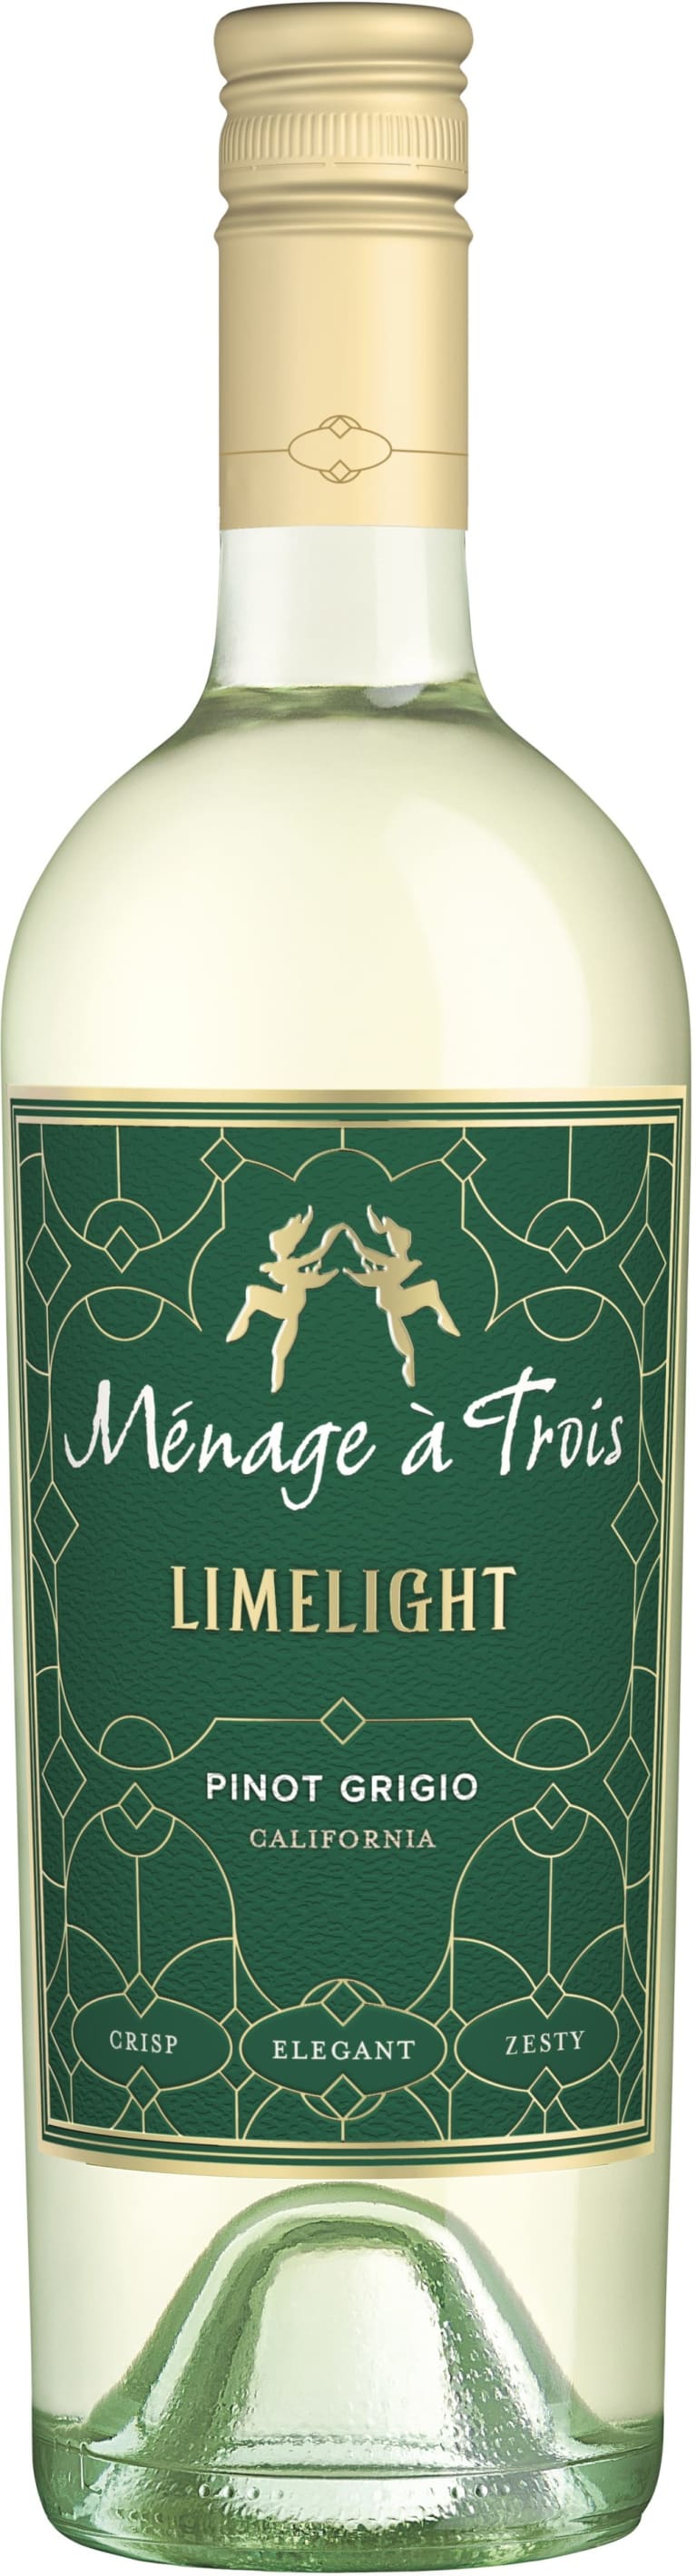 Menage A Trois Pinot Grigio Limelight 2019